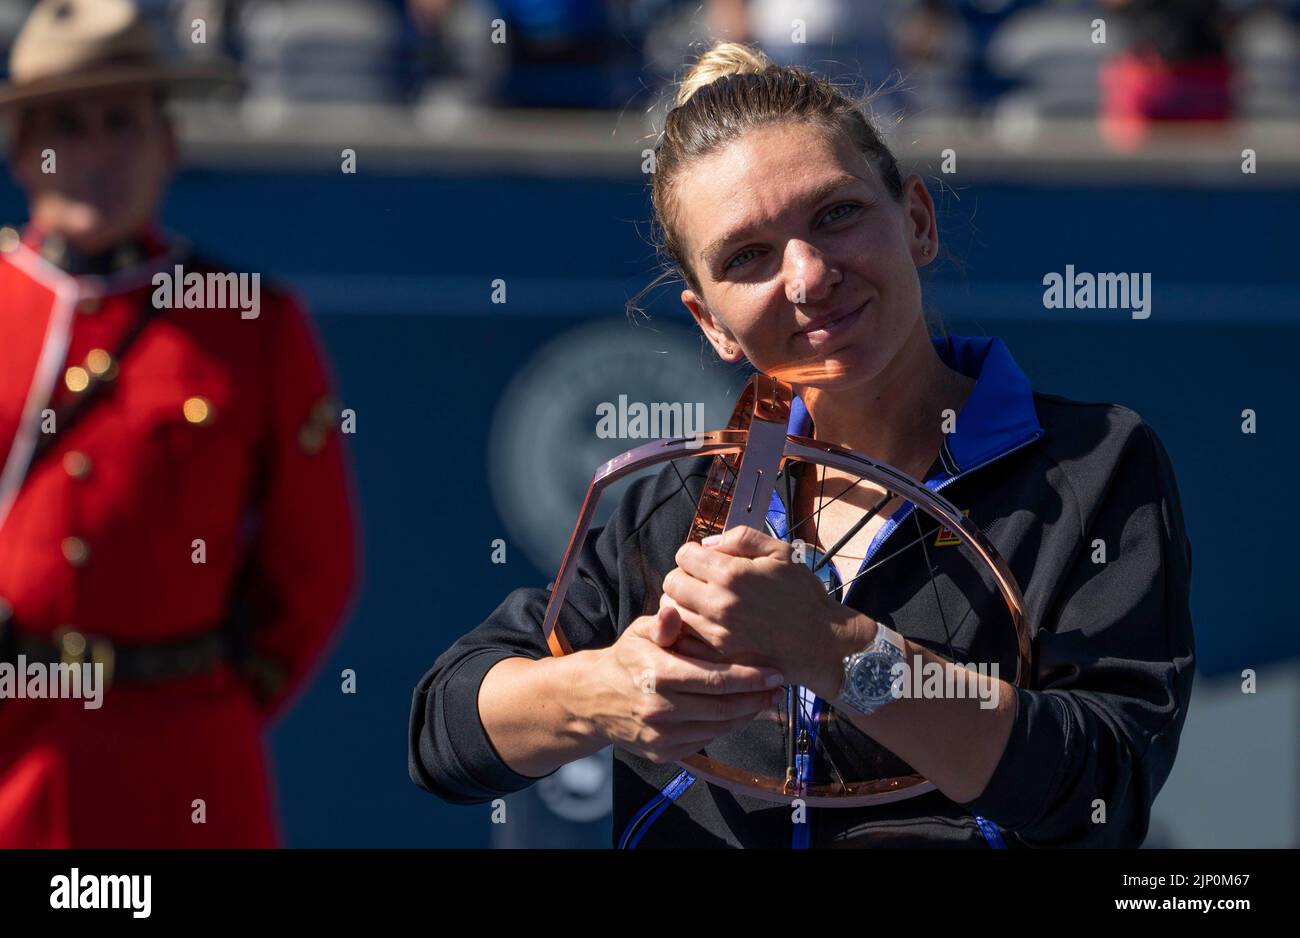 Toronto, Canada. 14th Aug, 2022. Simona Halep of Romania poses for photos with her trophy during the awarding ceremony after the women's singles final between Beatriz Haddad Maia of Brazil and Simona Halep of Romania at the 2022 National Bank Open tennis tournament in Toronto, Canada, Aug. 14, 2022. Credit: Zou Zheng/Xinhua/Alamy Live News Stock Photo